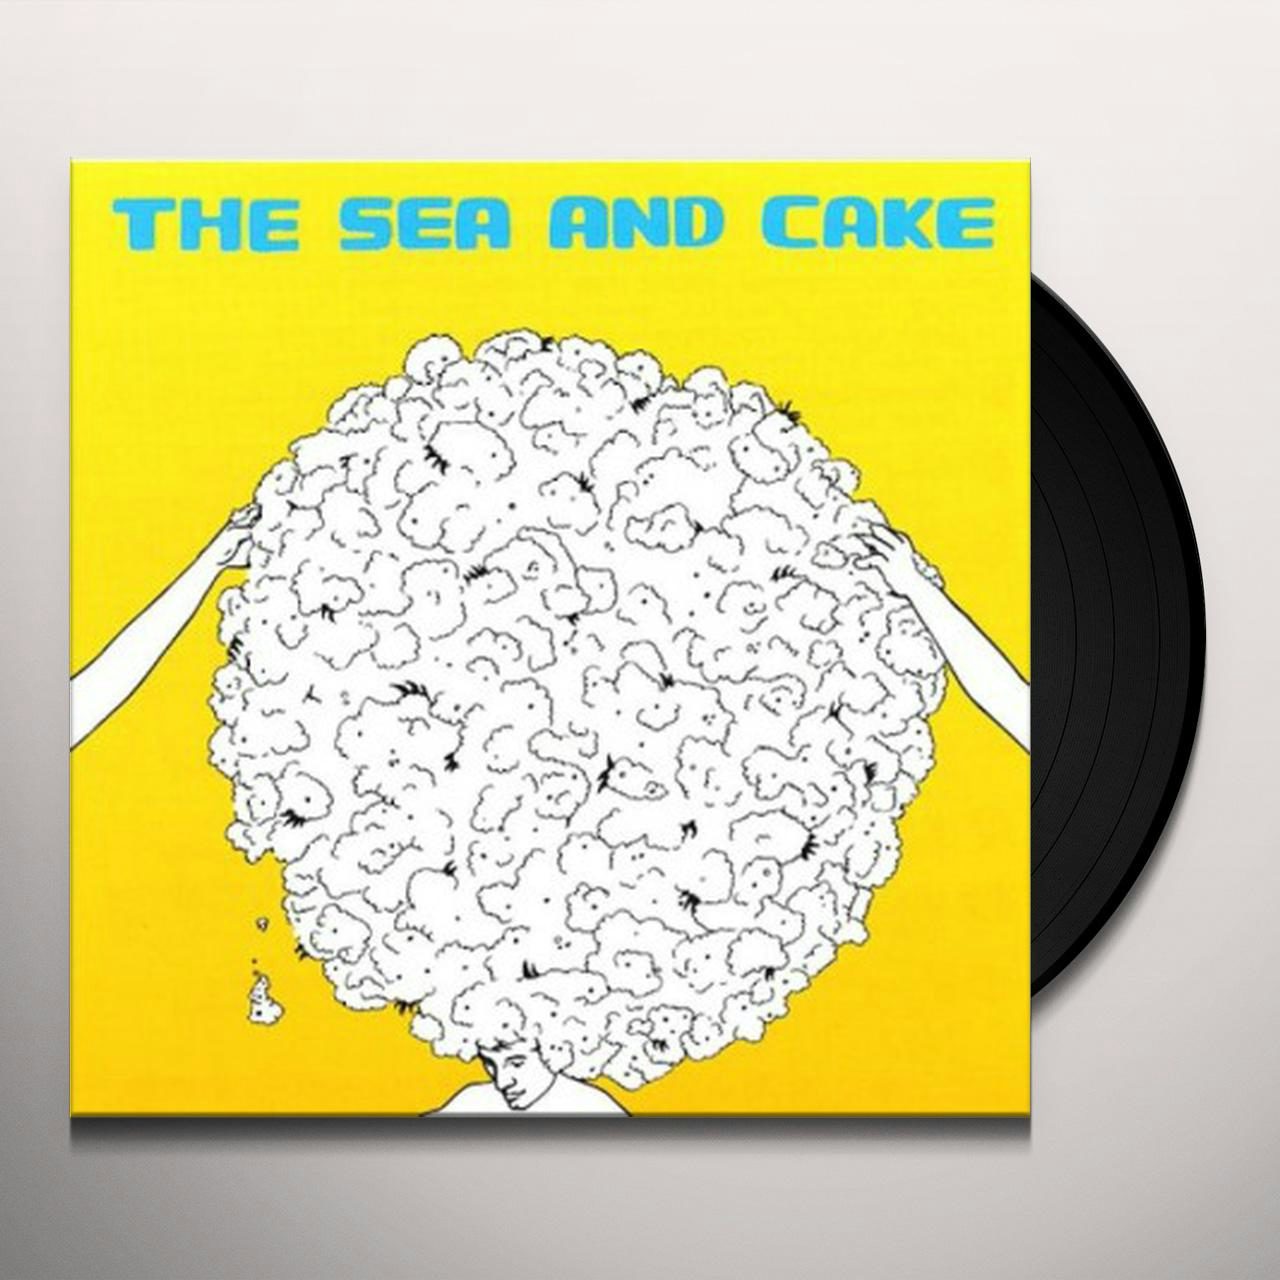 The Sea and Cake Vinyl Record